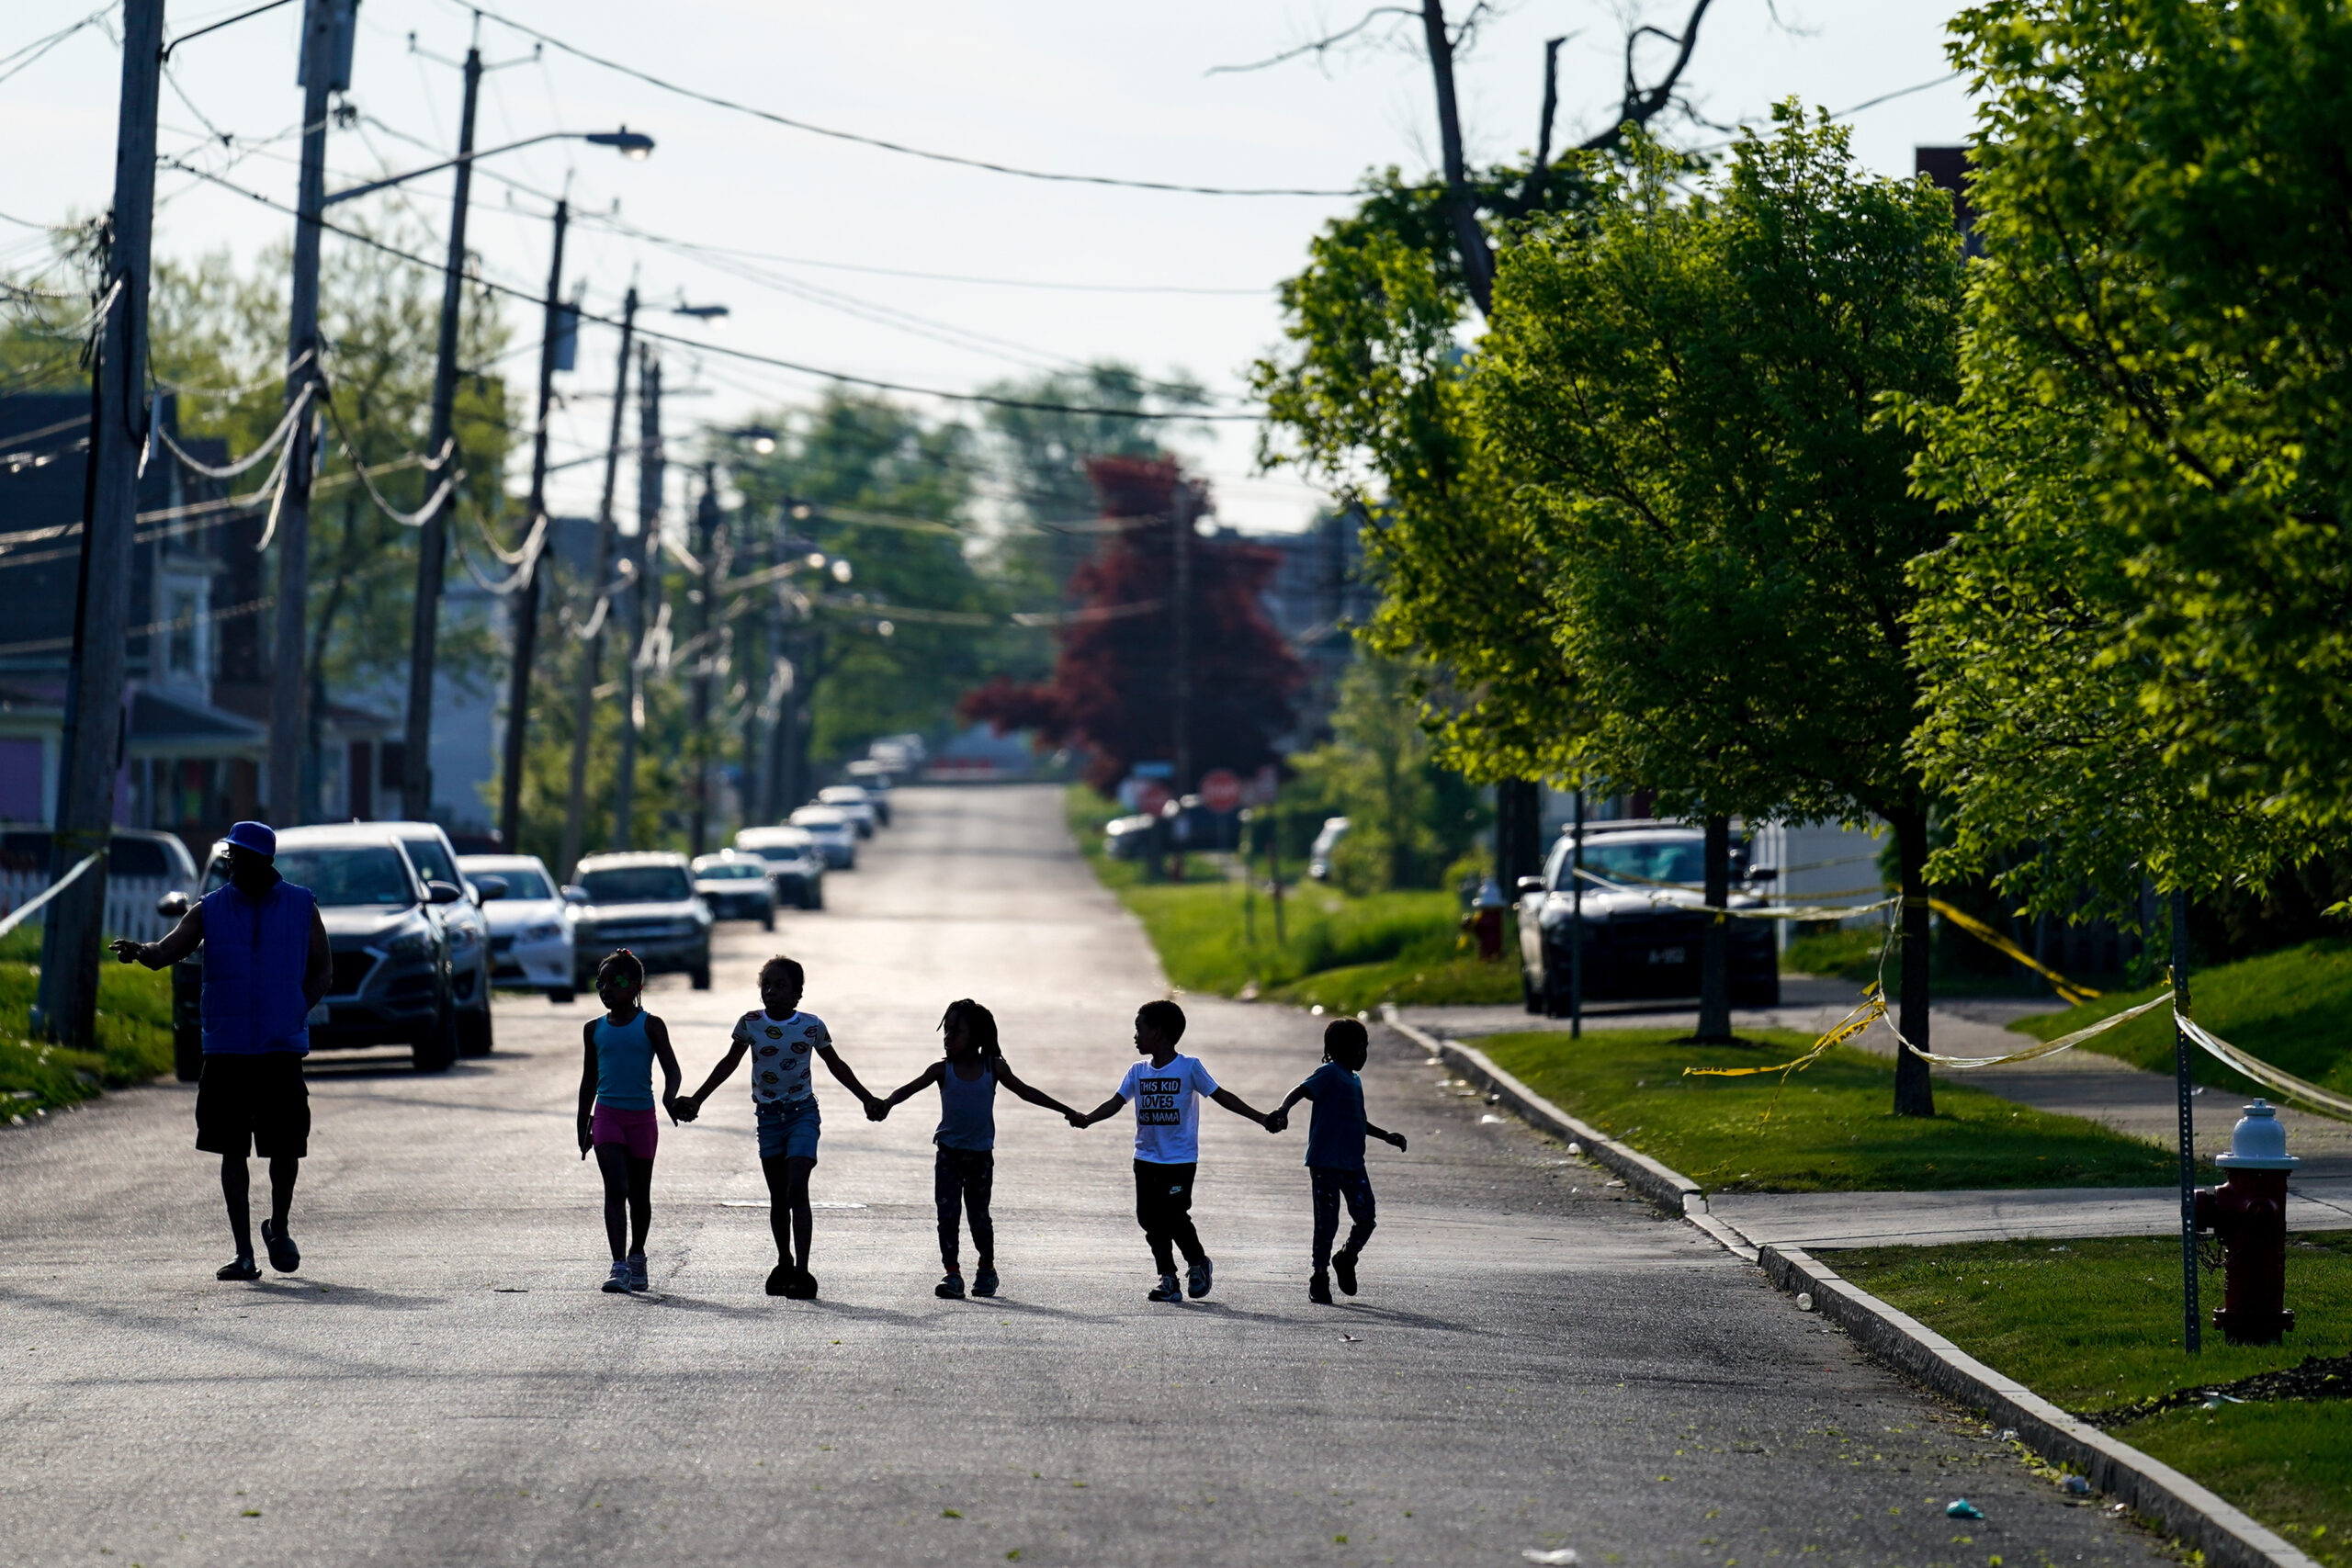 Children walk hand in hand out near the scene of a shooting at a supermarket in Buffalo, N.Y., Sunday, May 15, 2022. (AP Photo/Matt Rourke)